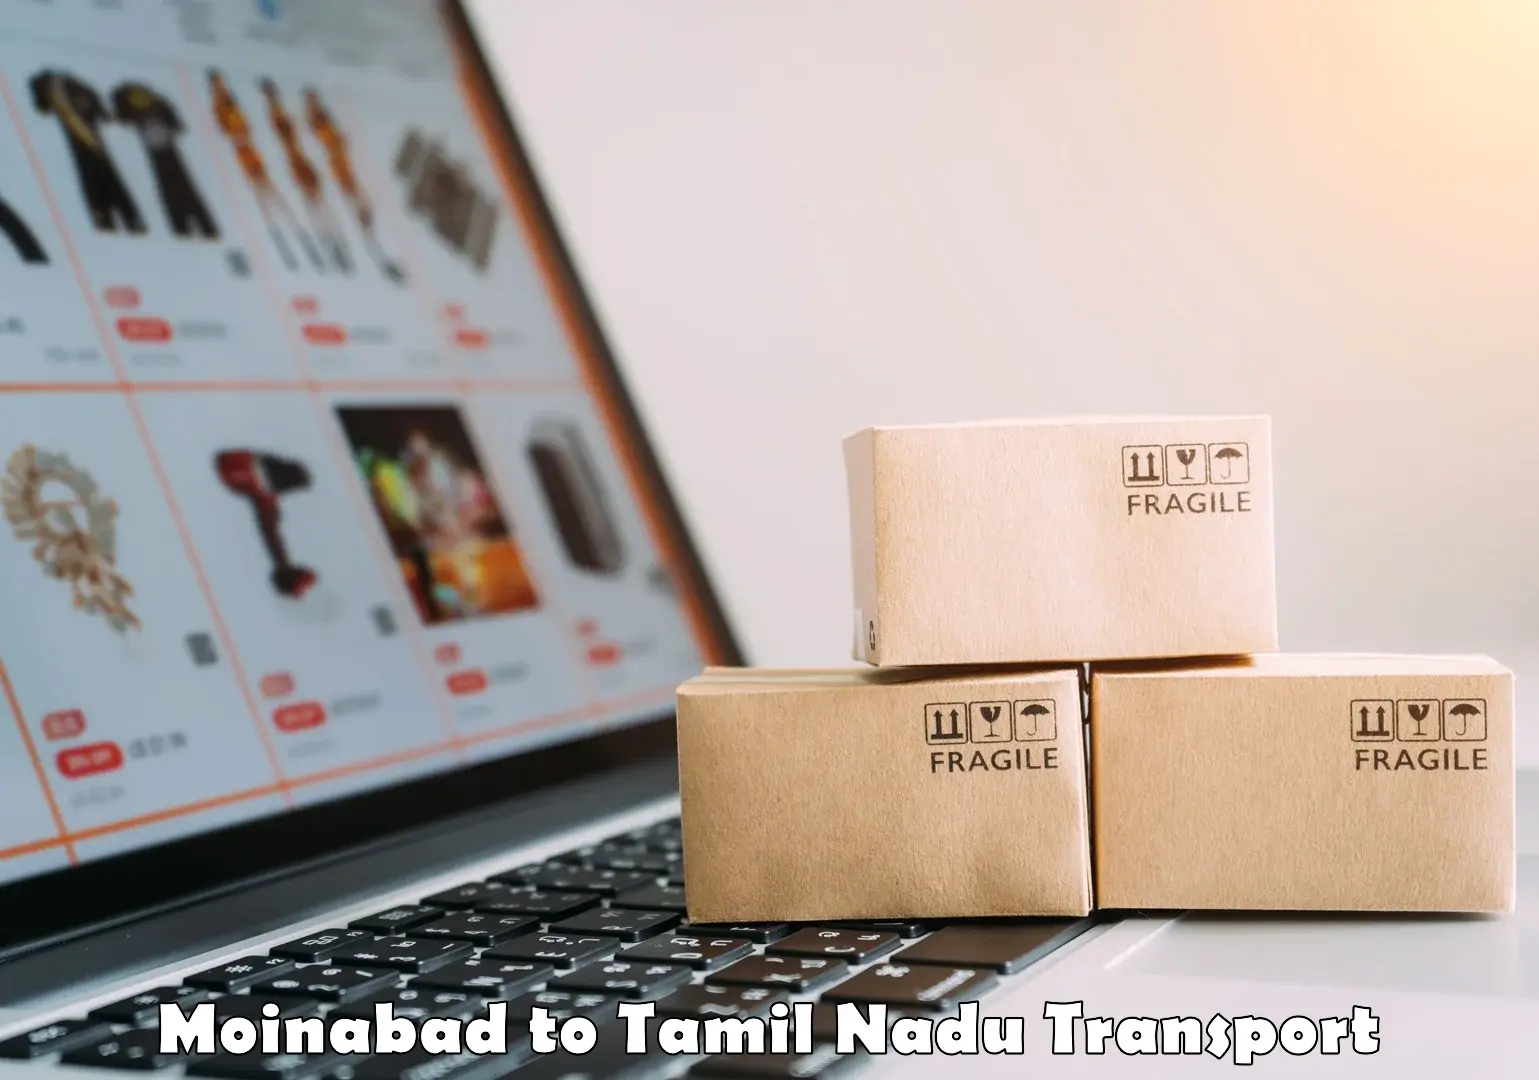 Daily transport service Moinabad to Tamil Nadu